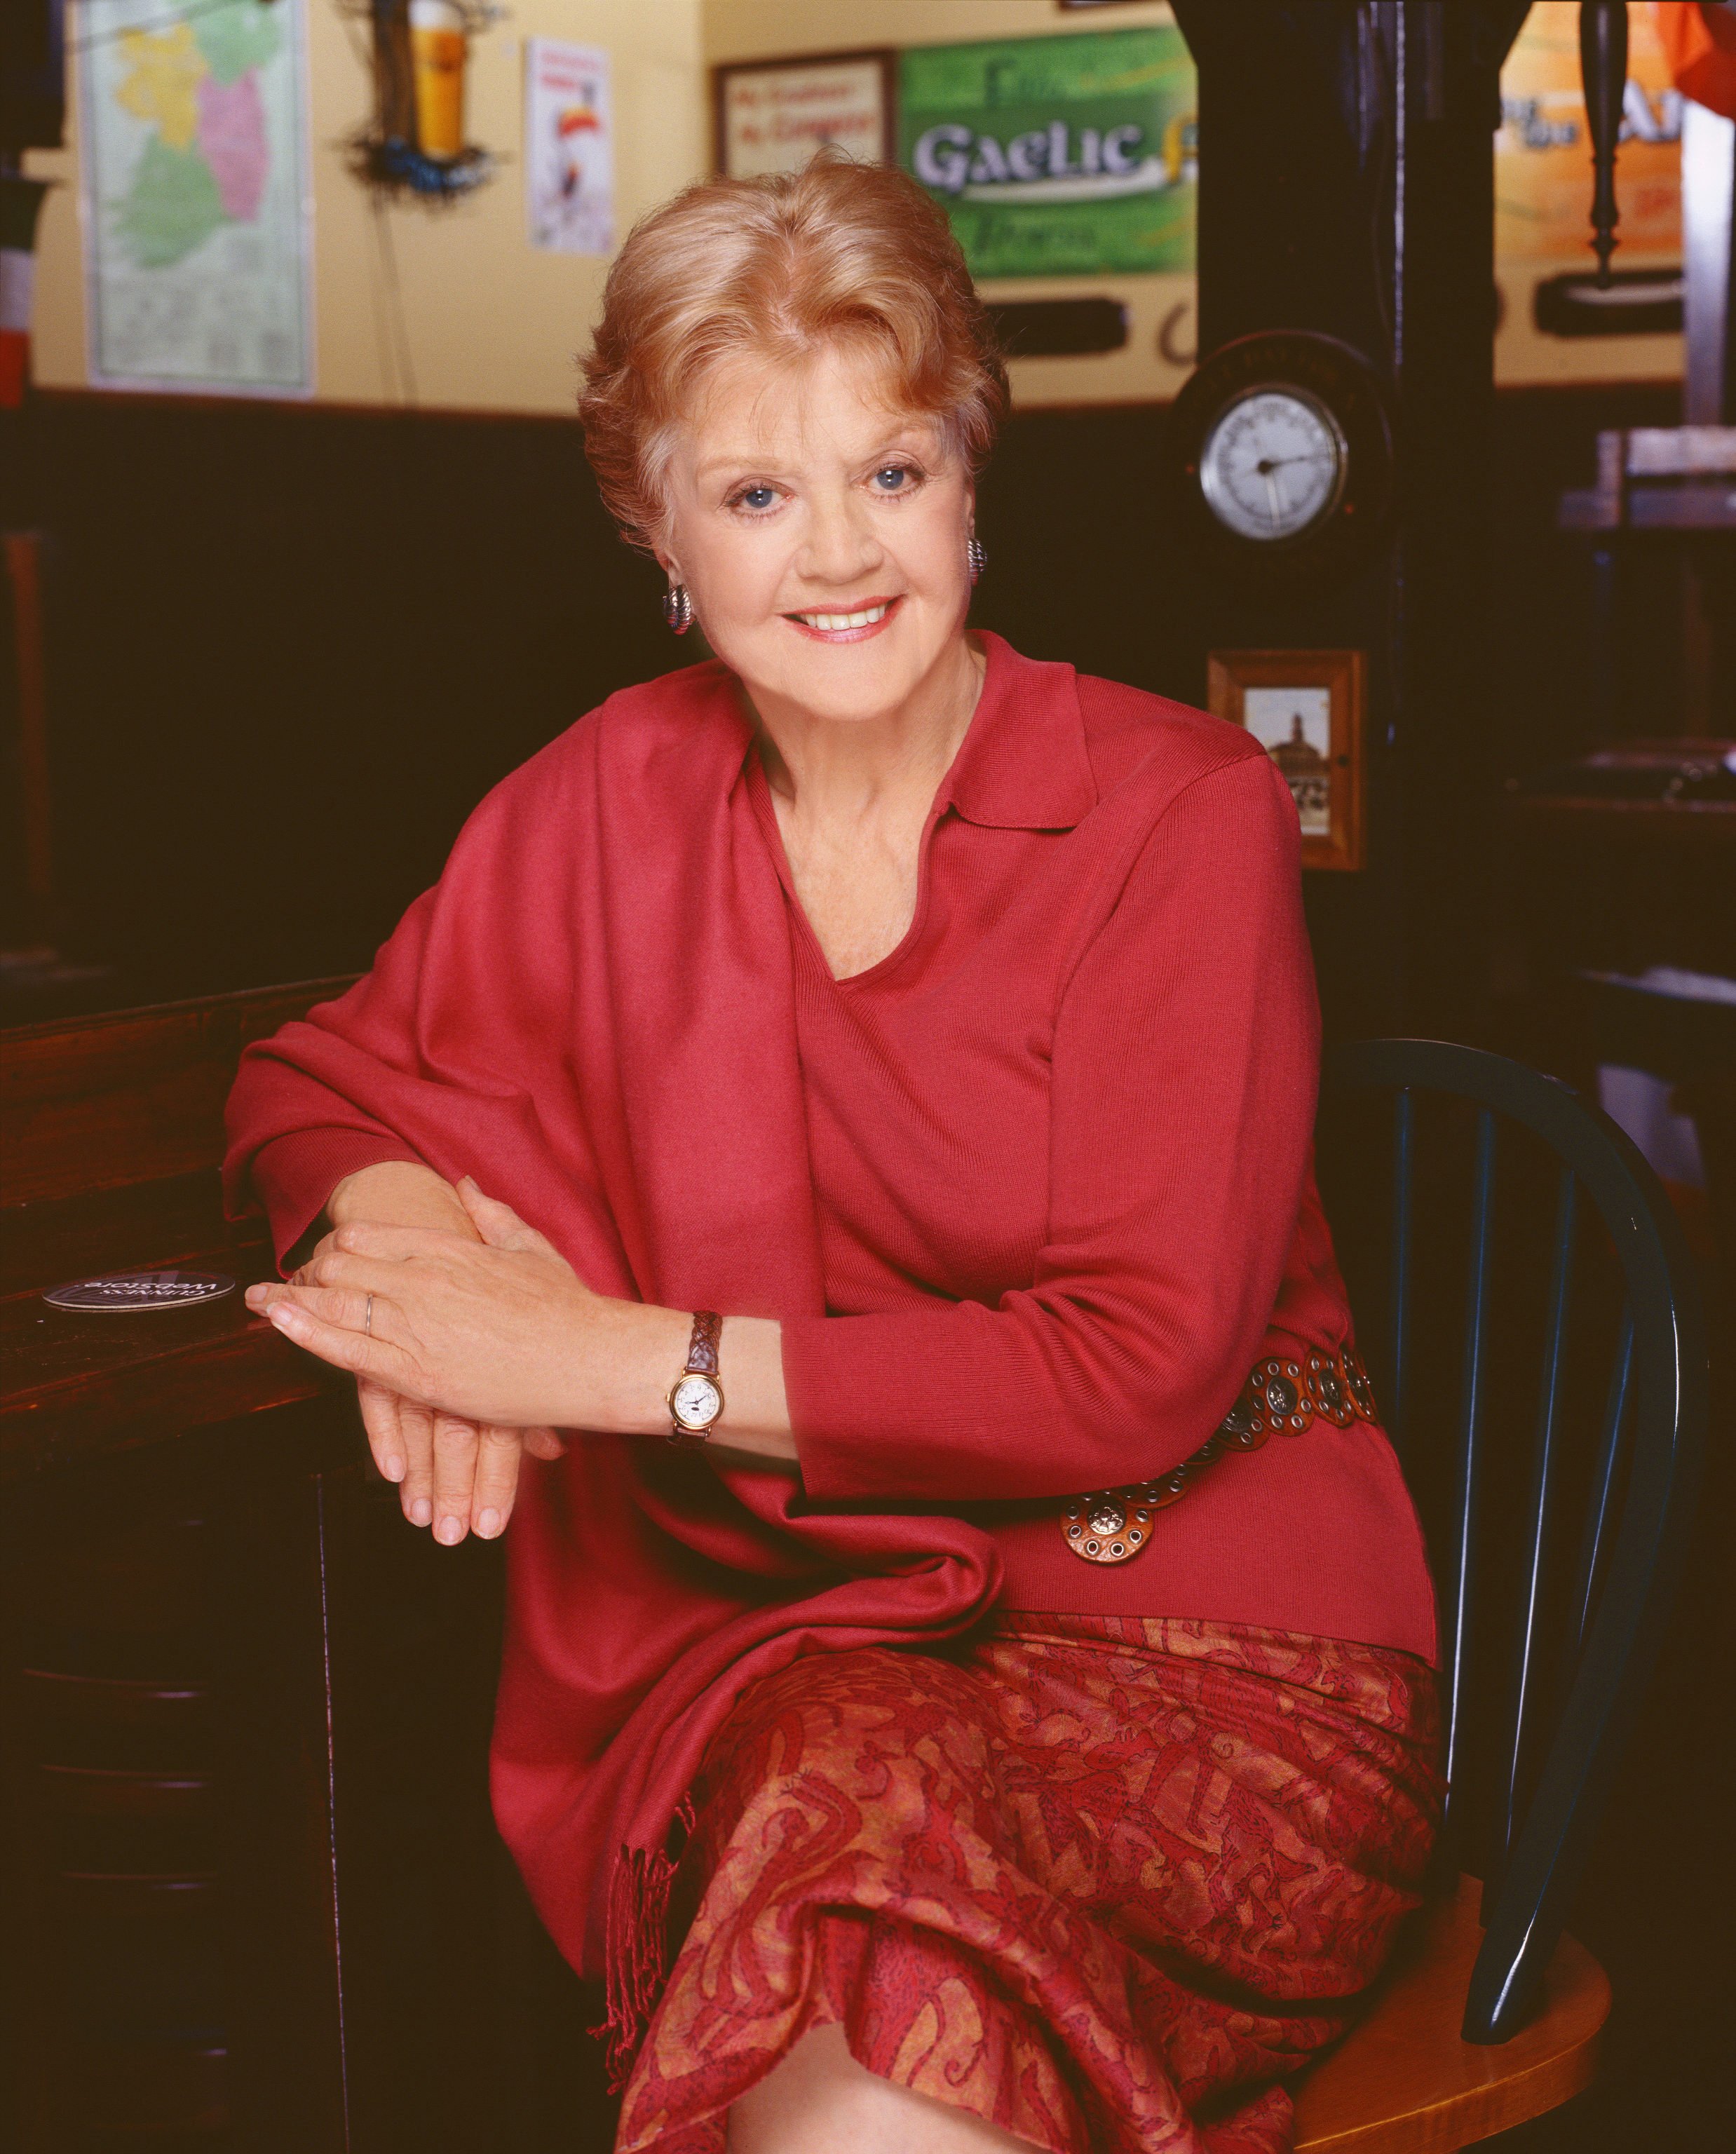 Angela Lansbury photographed for the series 